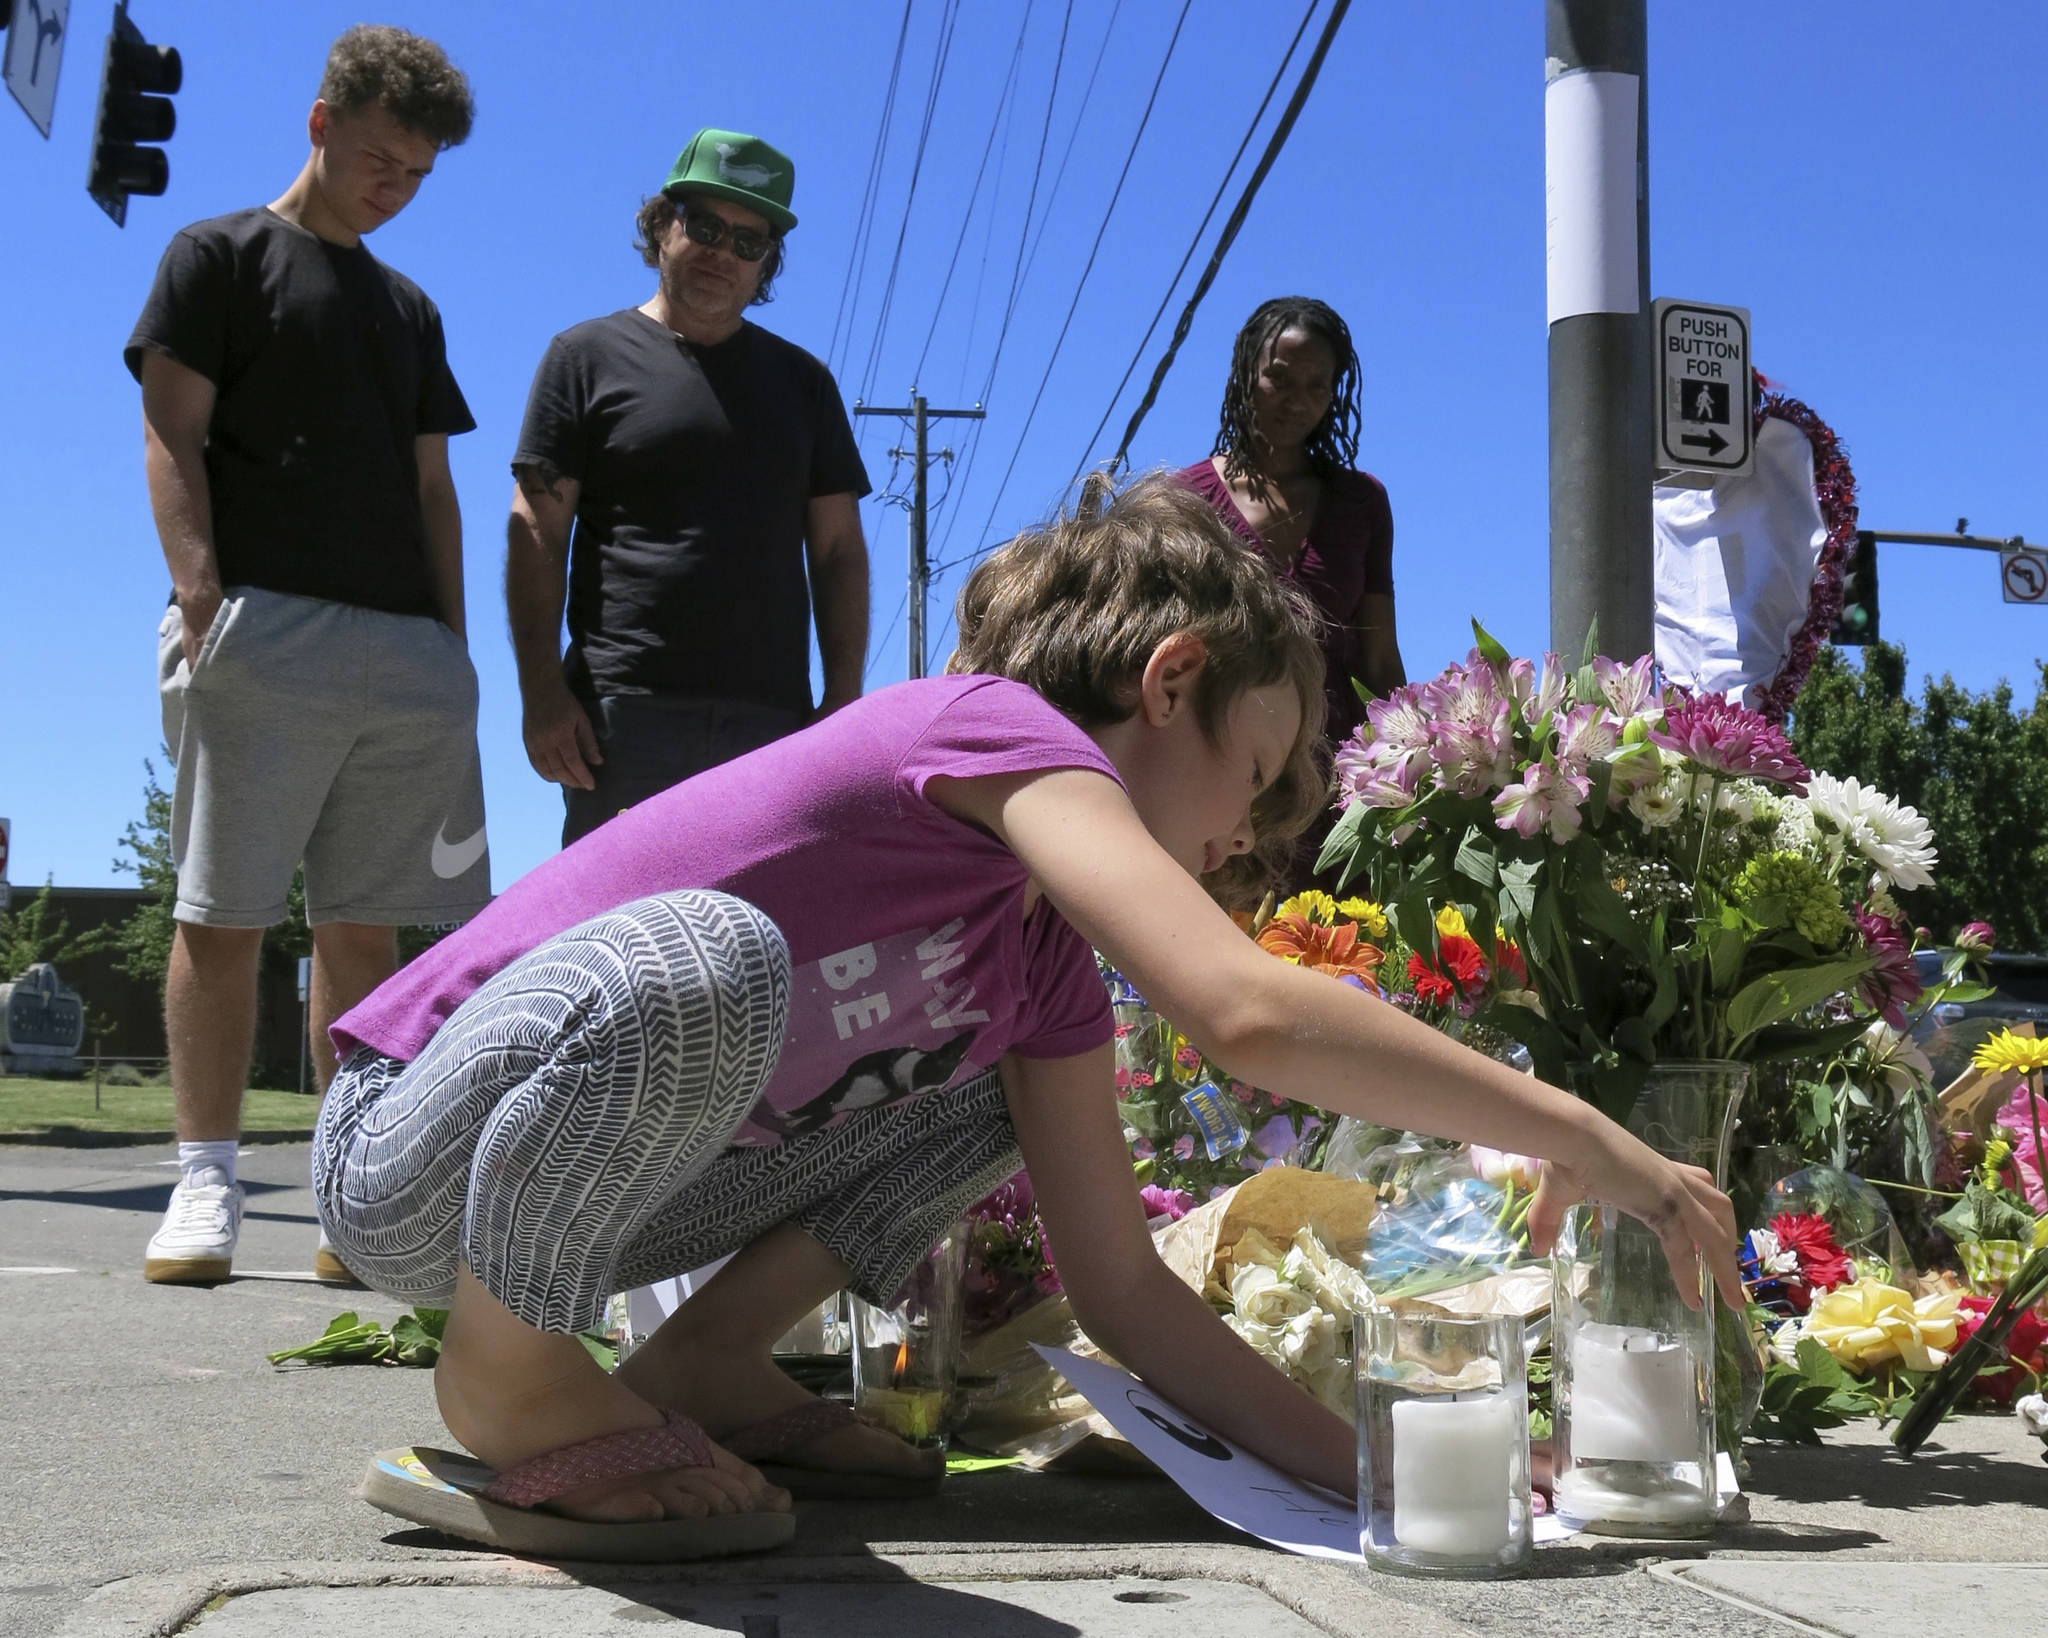 Coco Douglas, 8, leaves a handmade sign and rocks she painted at a memorial in Portland, Oregon on Saturday, May 27, 2017, for two bystanders who were stabbed to death Friday while trying to stop a man who was yelling anti-Muslim slurs and acting aggressively toward two young women. From left are Coco’s brother, Desmond Douglas; her father, Christopher Douglas; and her stepmother, Angel Sauls. (Gillian Flaccus | The Associated Press)